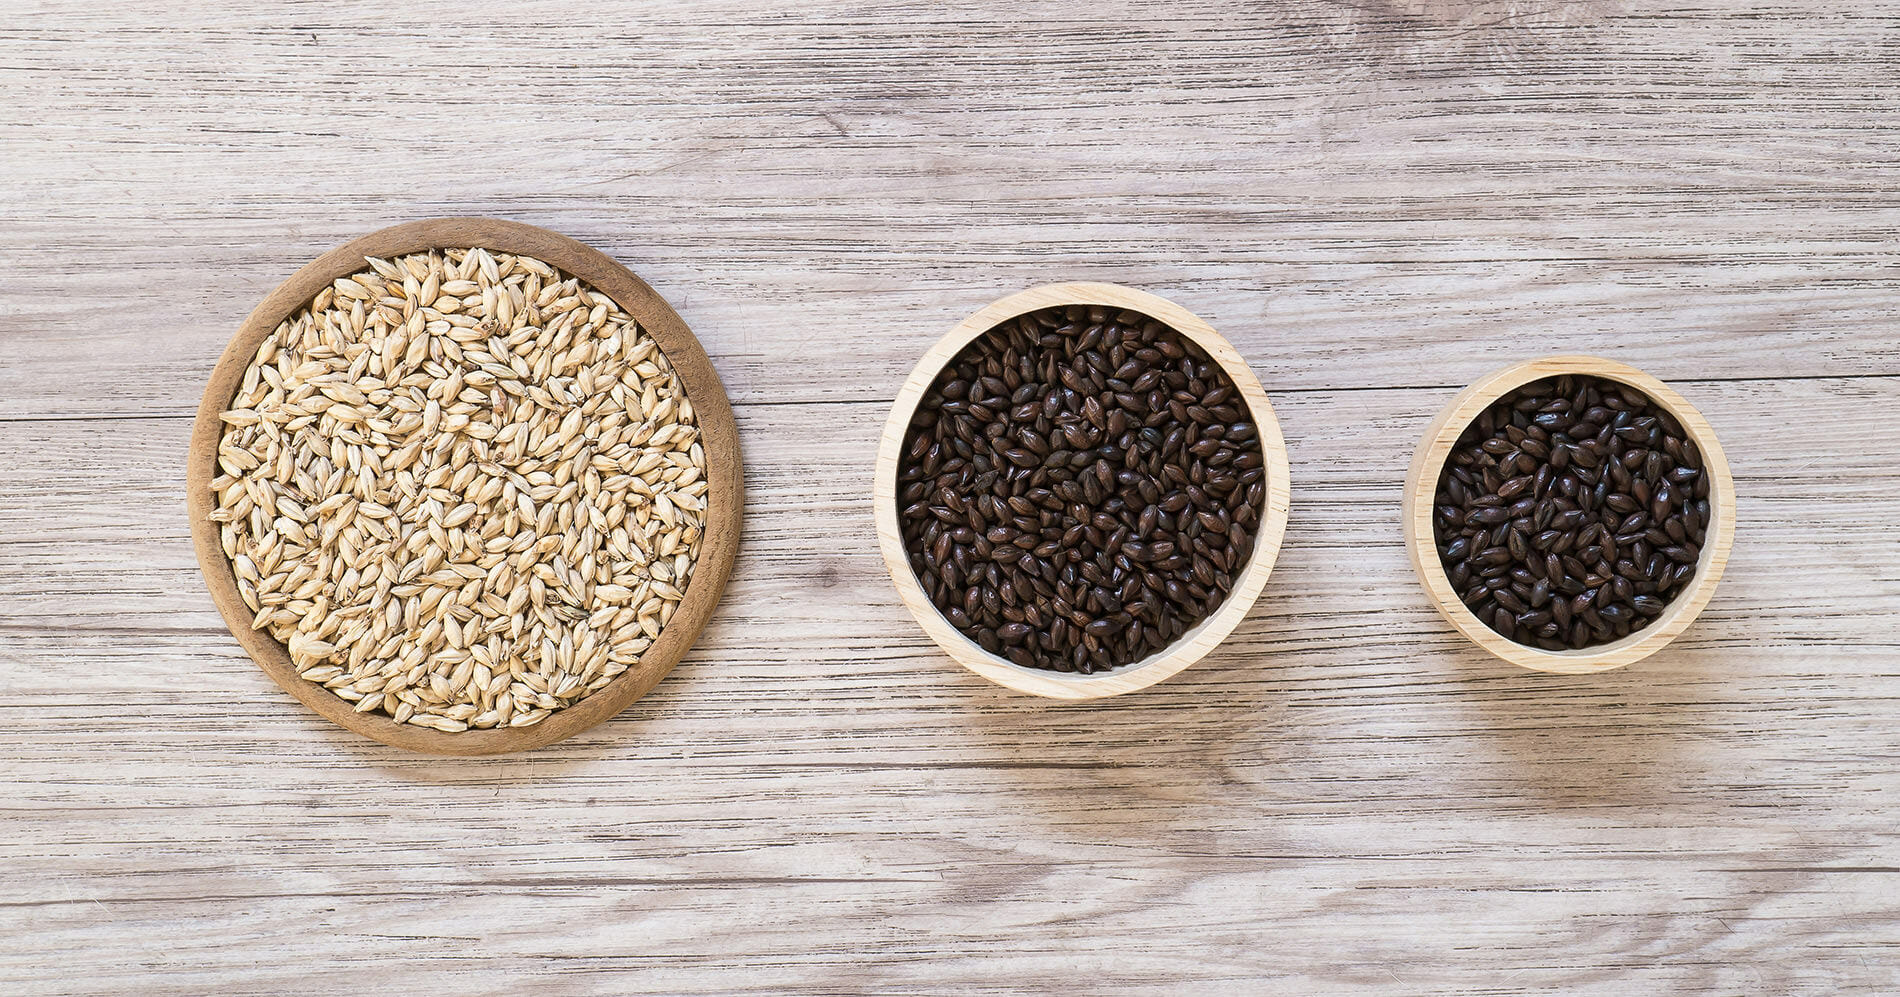 What are specialty malts in brewing?